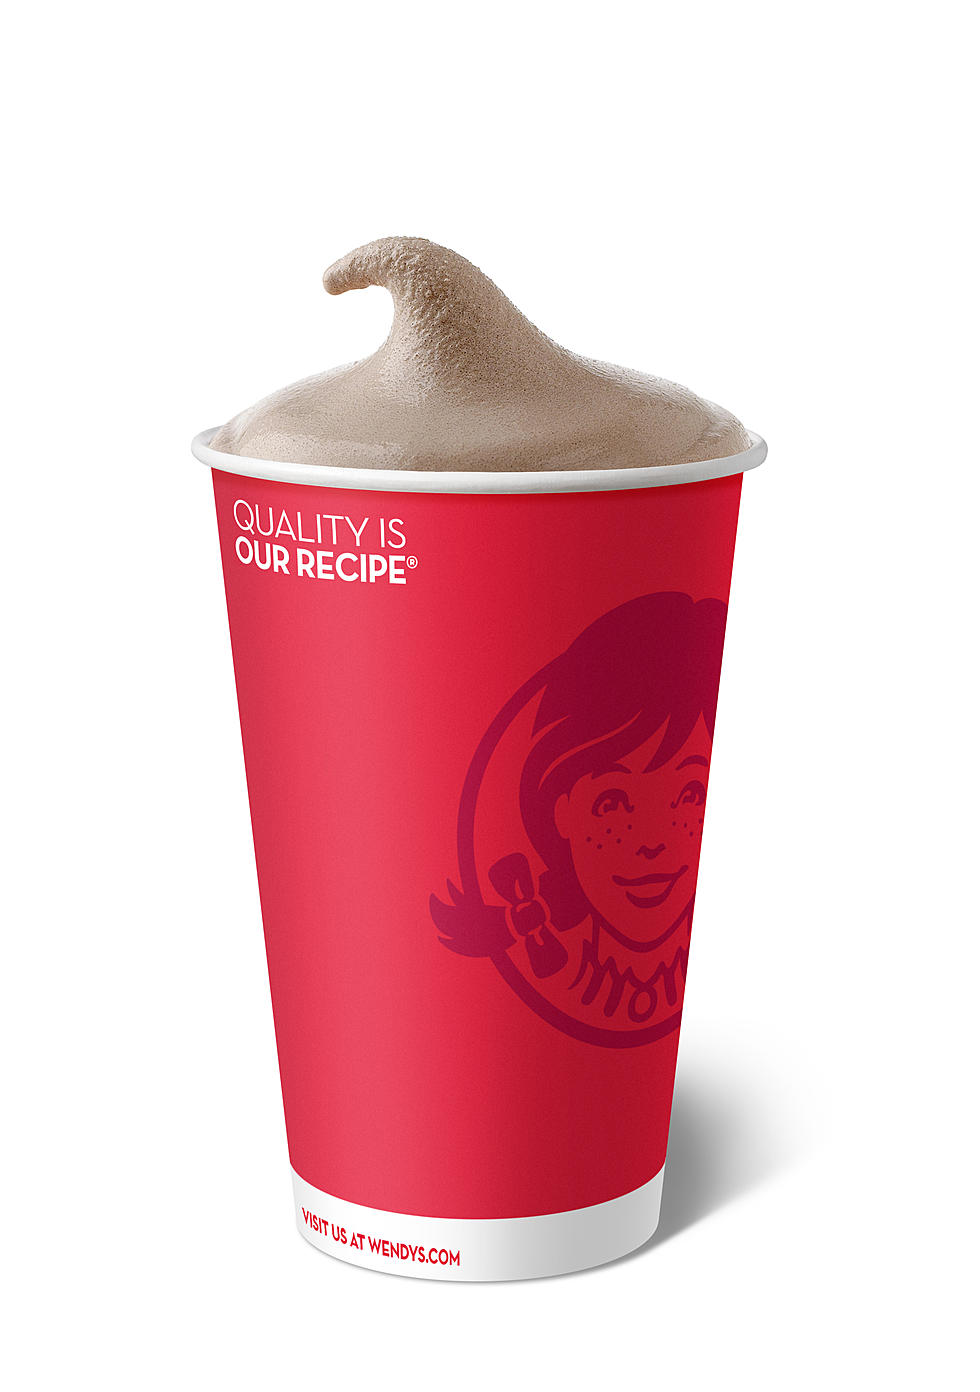 Free Frostys For All Of 2019?! Yes, Please! Here’s How…